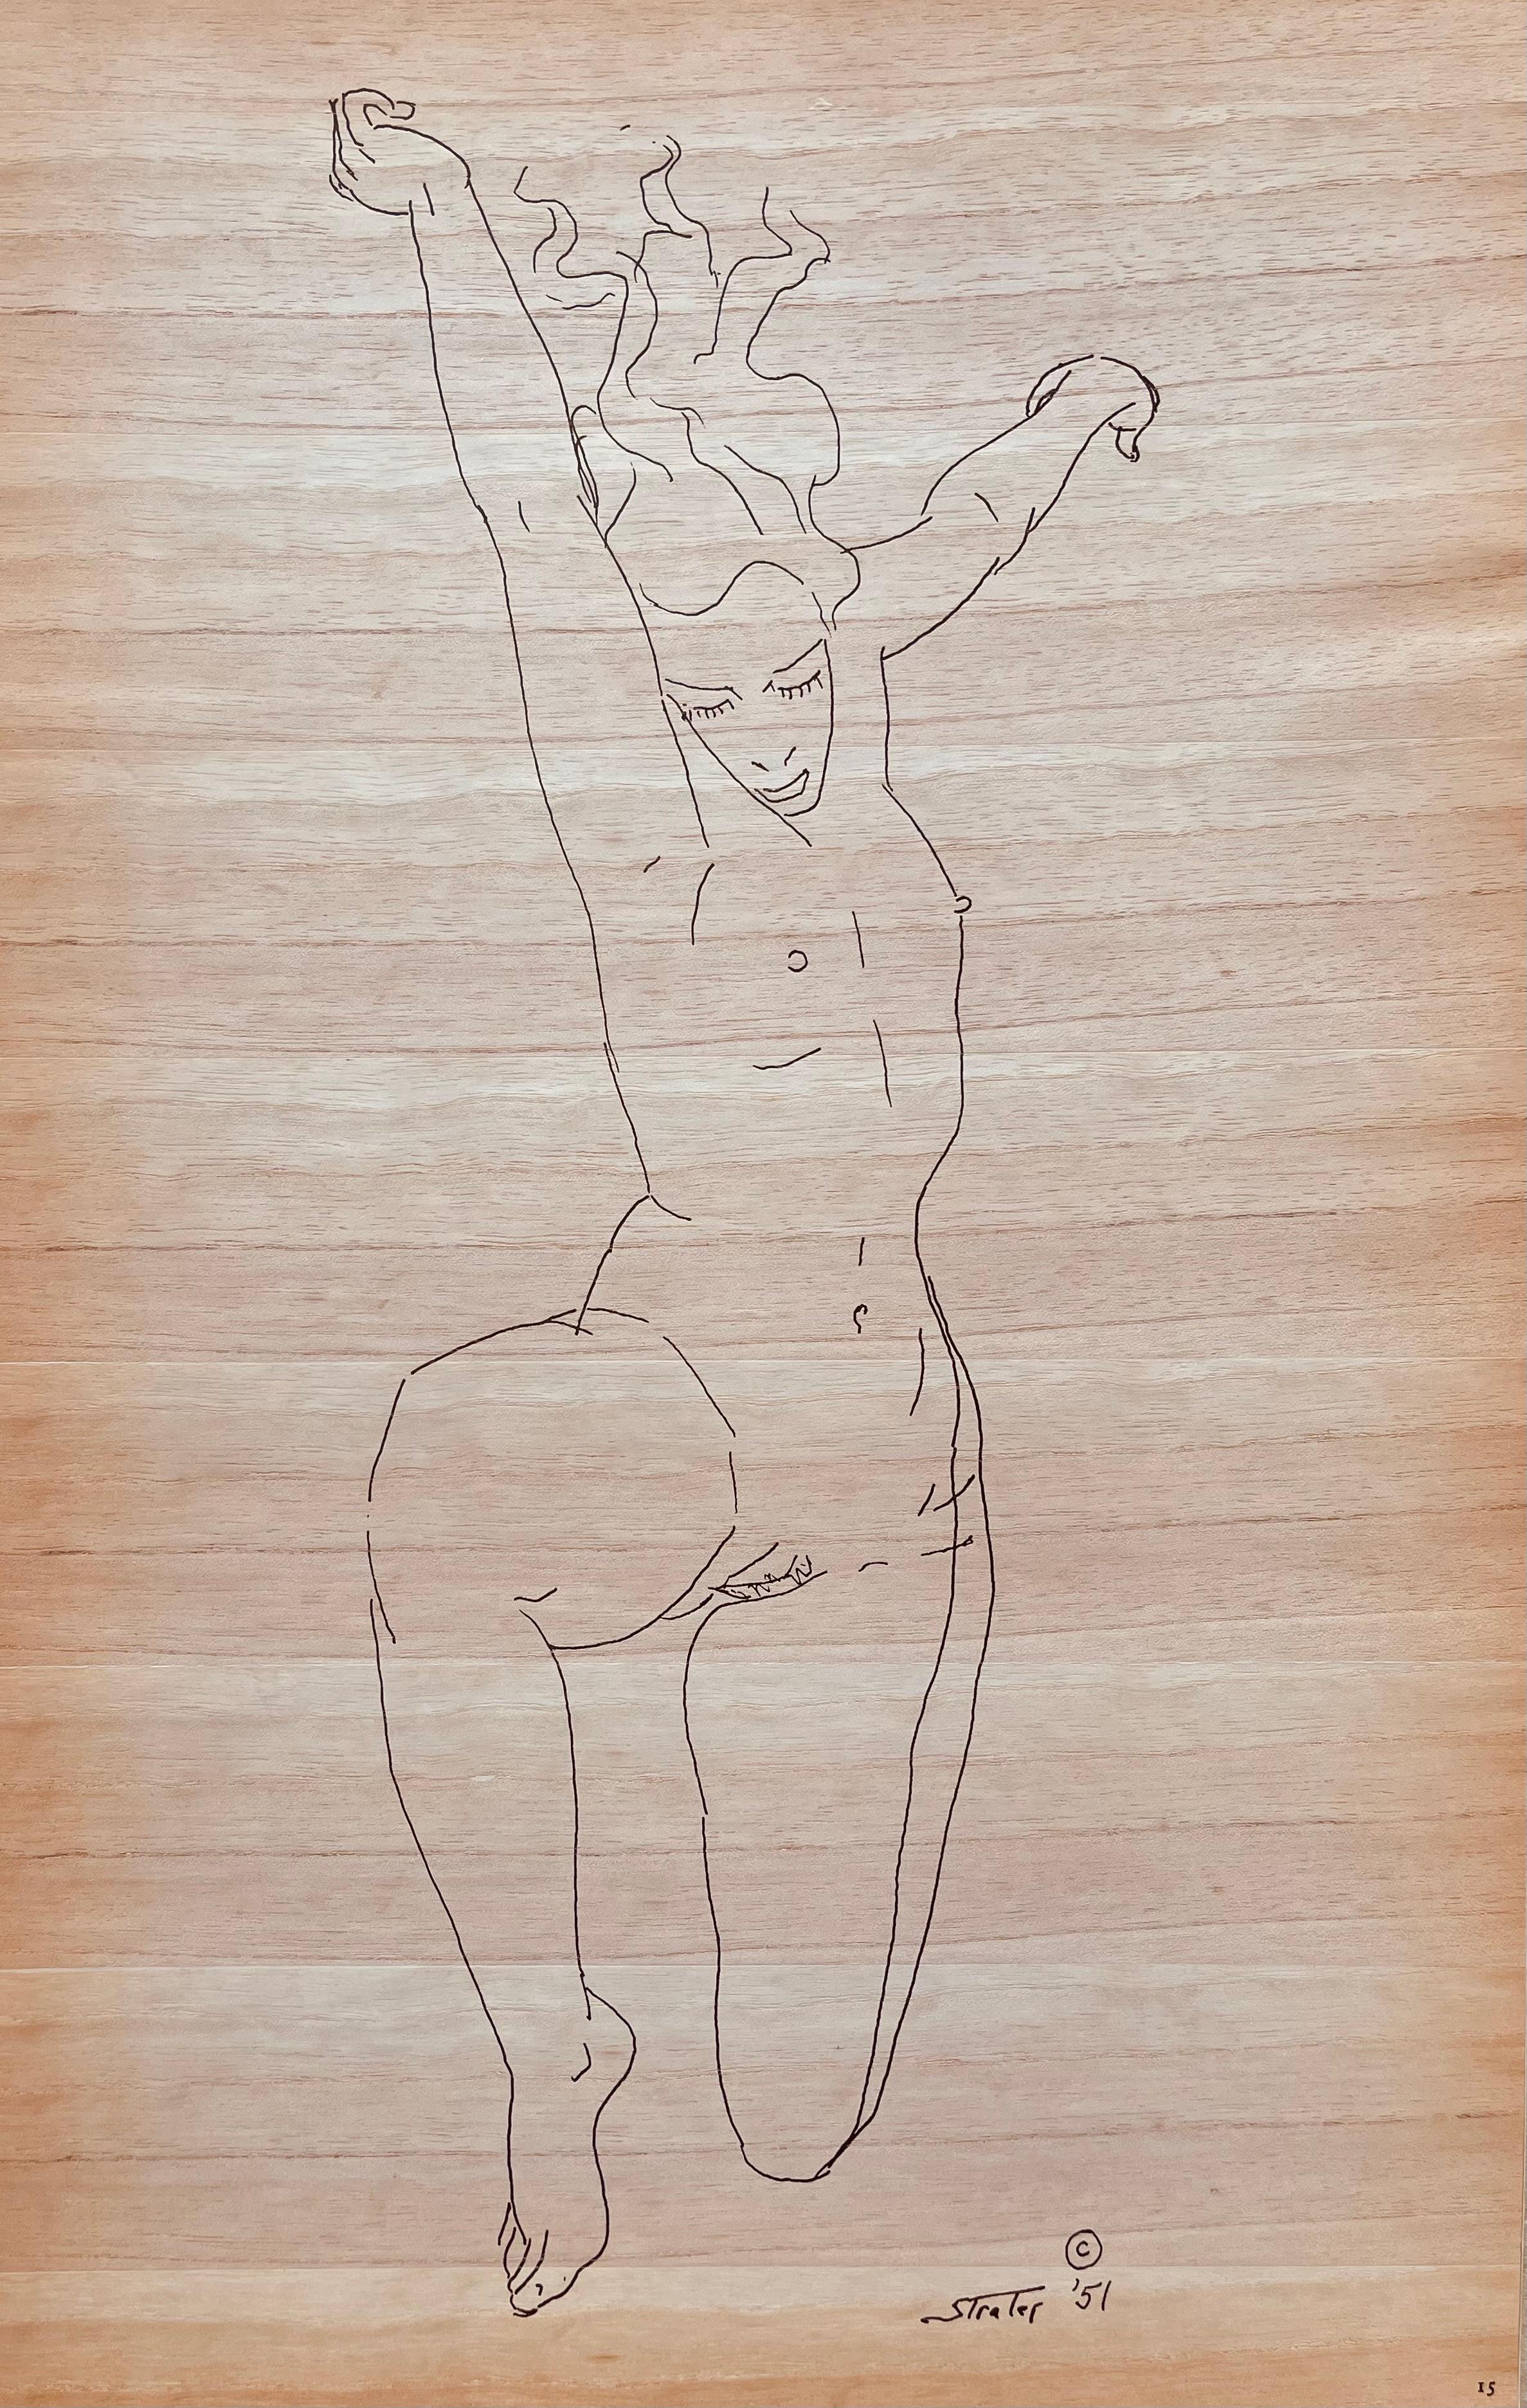 Original Edition Lithograph on wood veneer. Inscription: Signed in the plate and unnumbered, as issued. Good condition. Notes: From the folio, 24 Drawings by Henry Strater, 1958. Published by Henry Strater, Ogunquit, Maine; printed by The Anthoensen